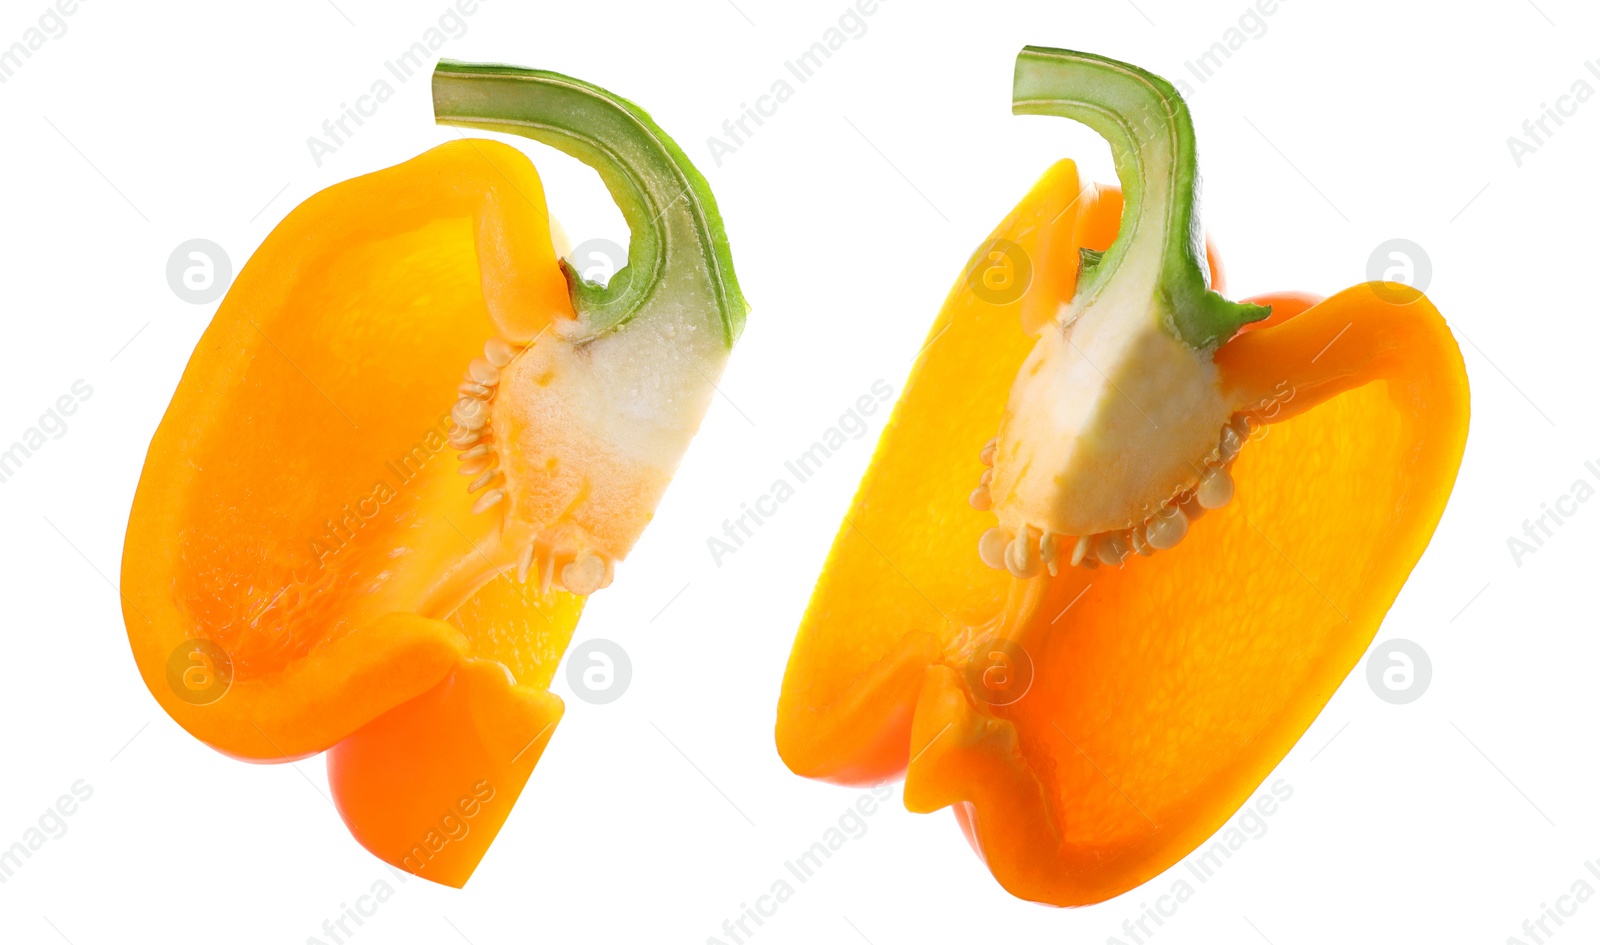 Image of Cut ripe orange bell peppers on white background